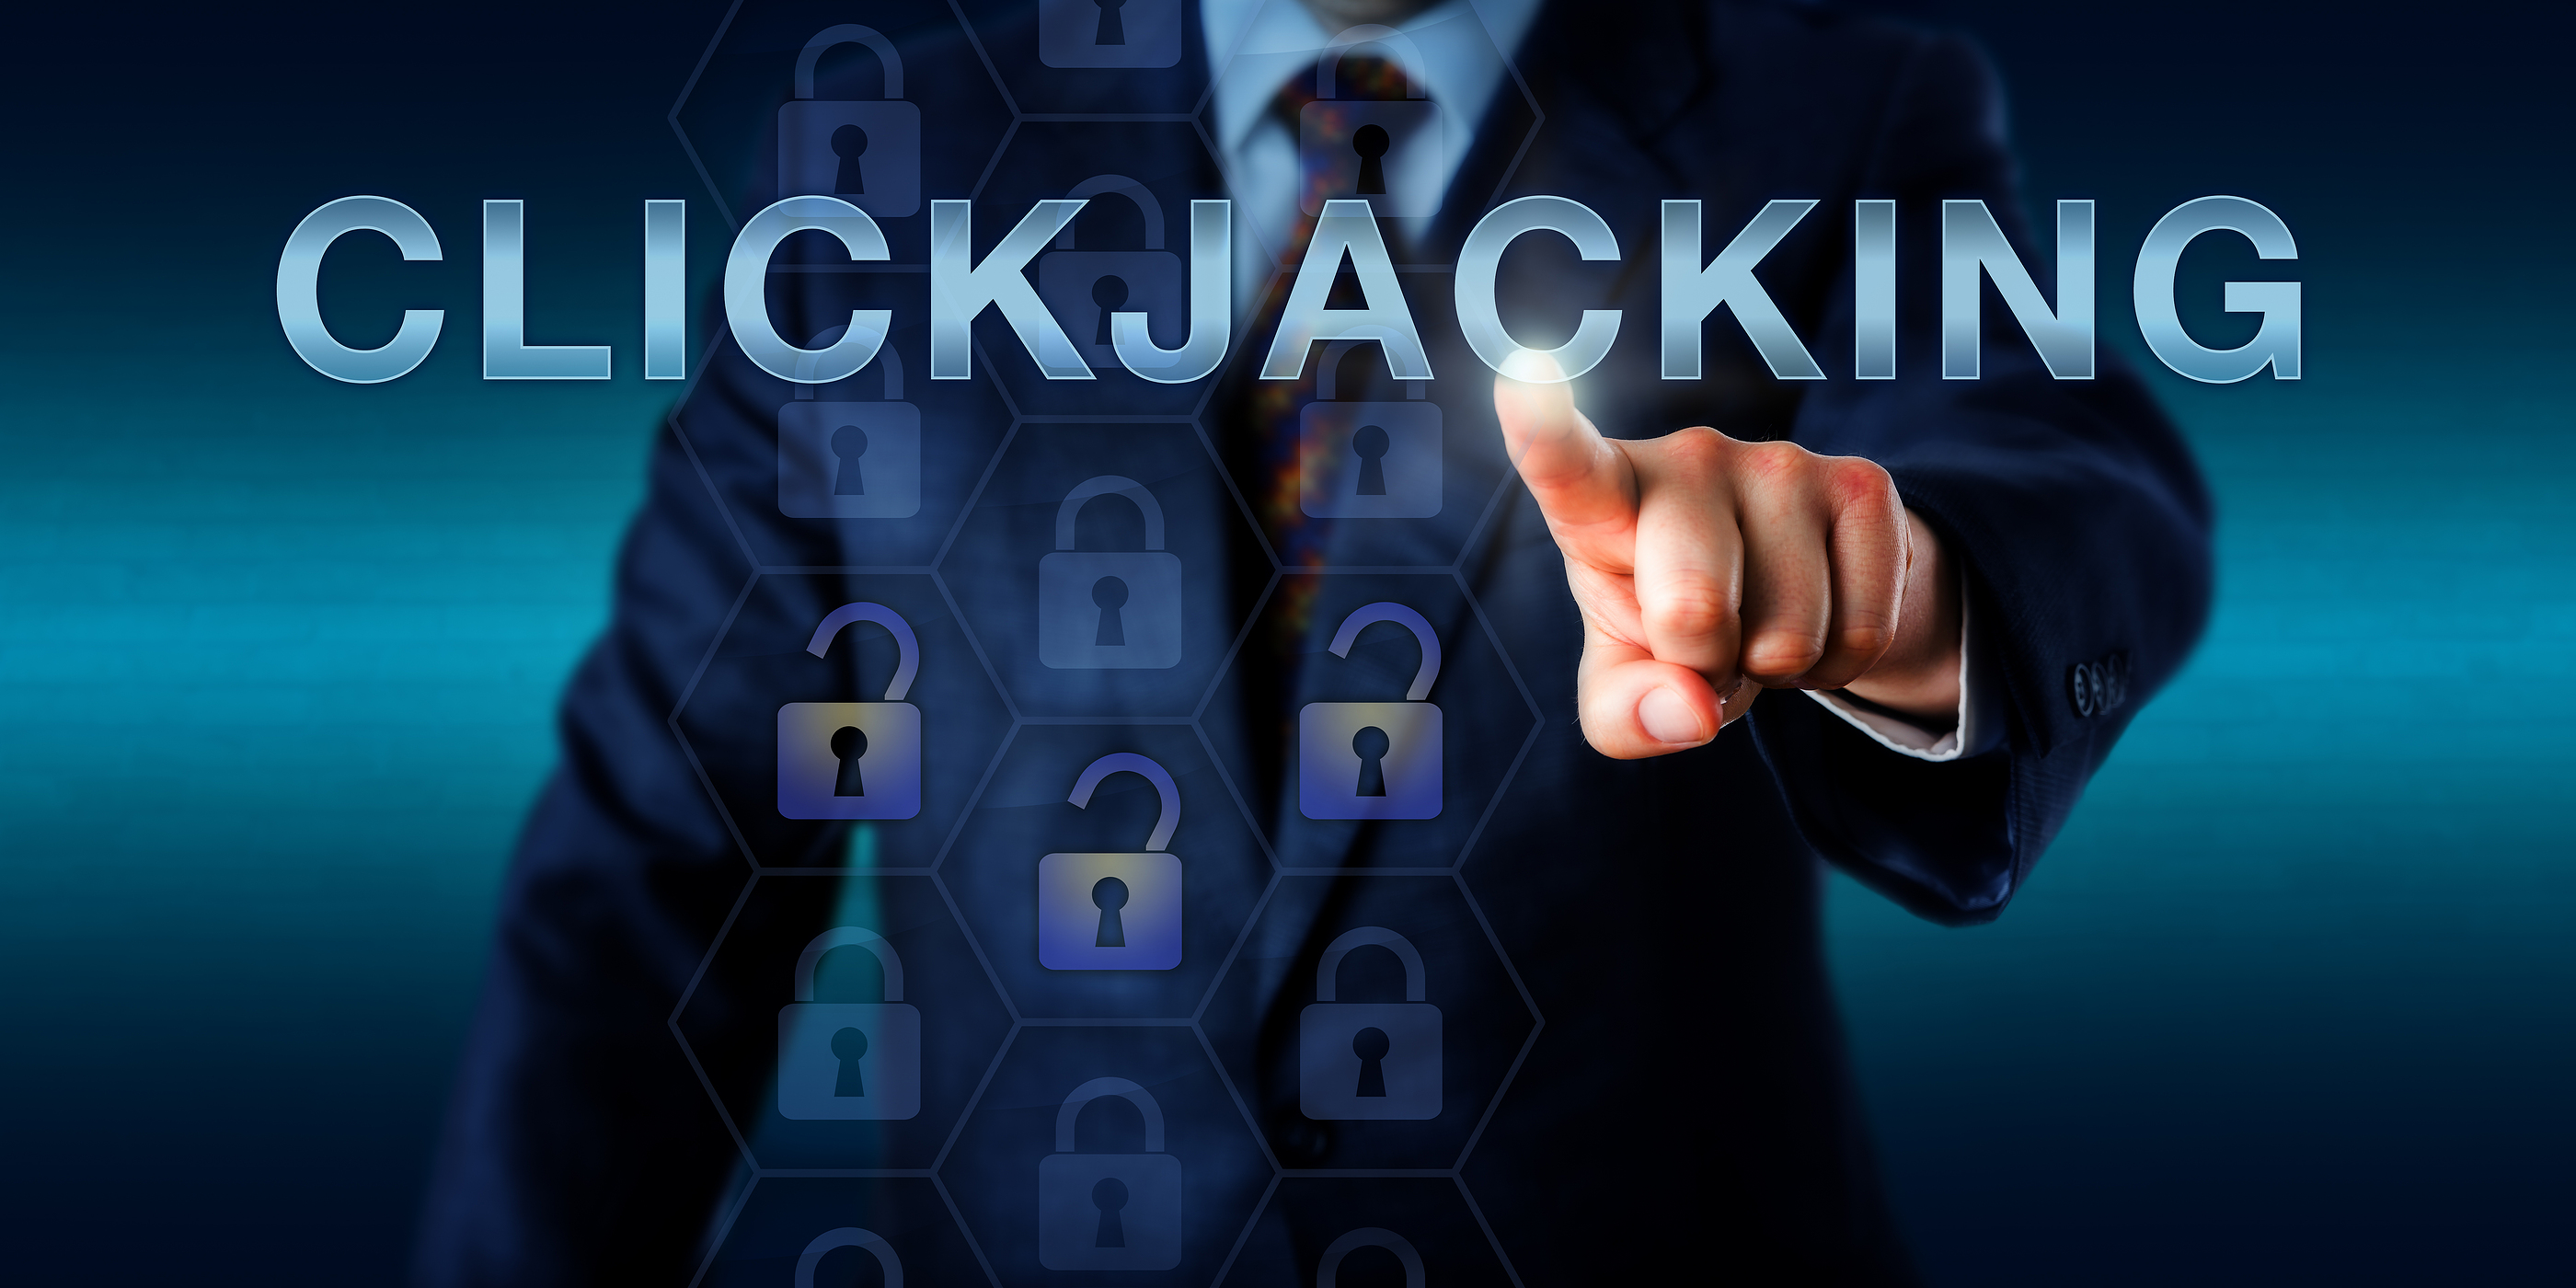 Are You Getting Your Clicks Stolen? Learn What Clickjacking Is & How to Protect Yourself